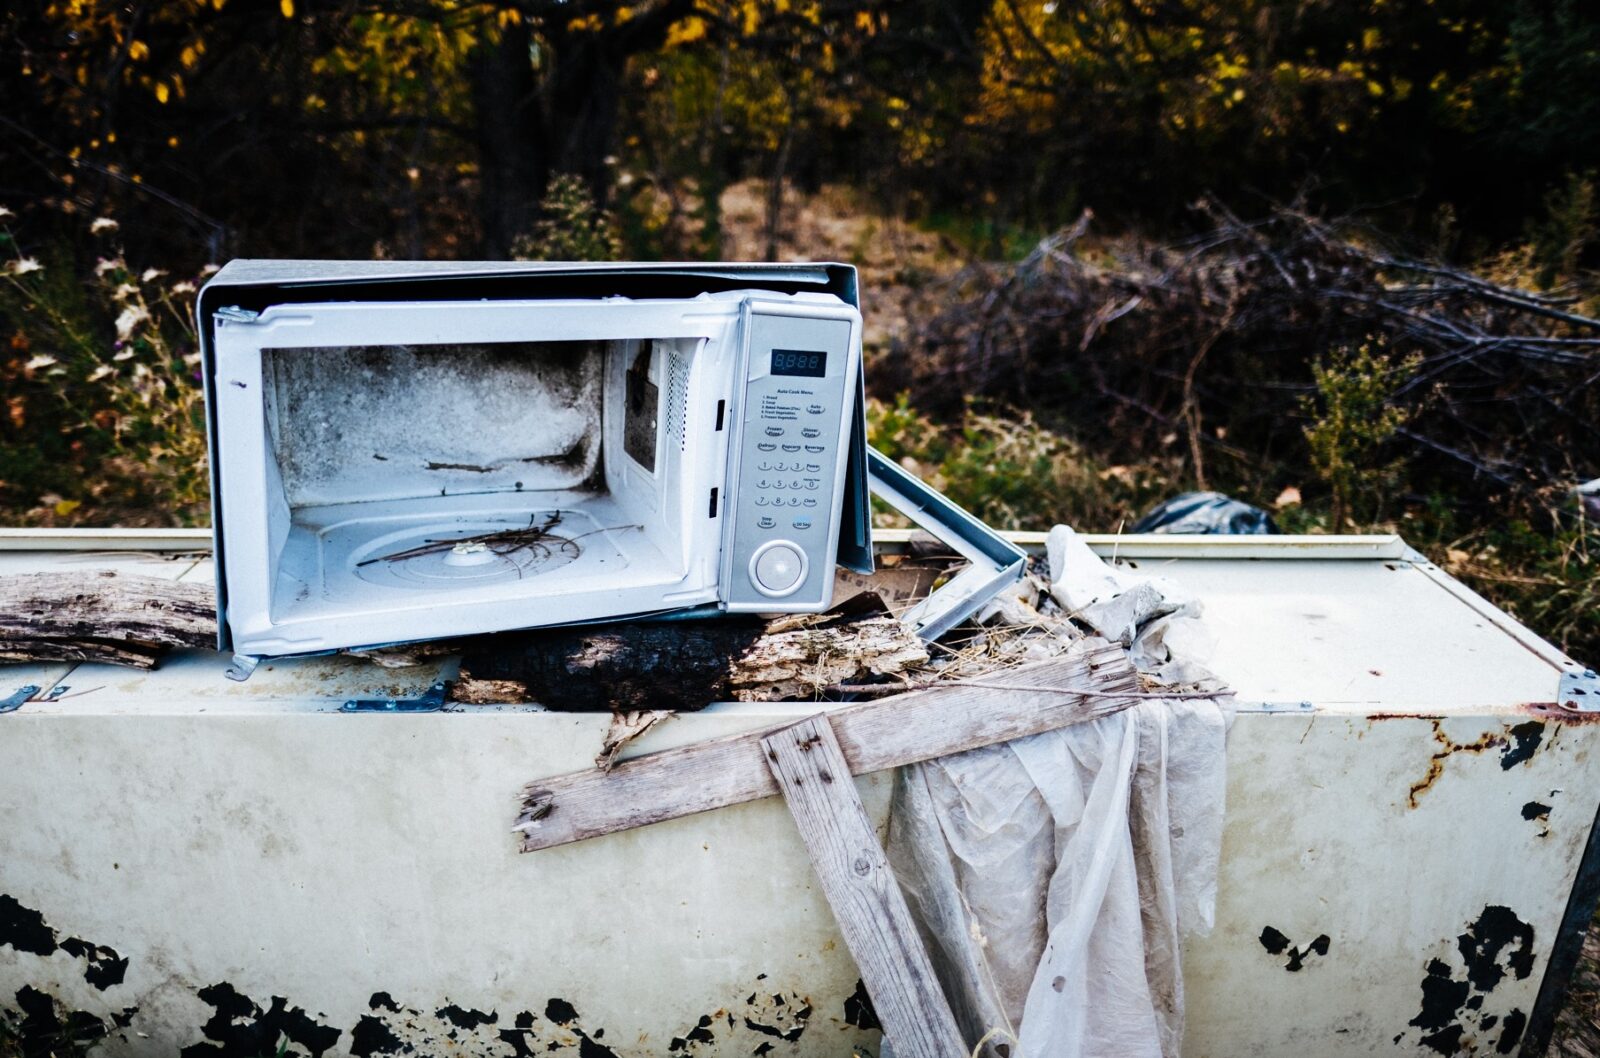 How to Dispose of a Microwave